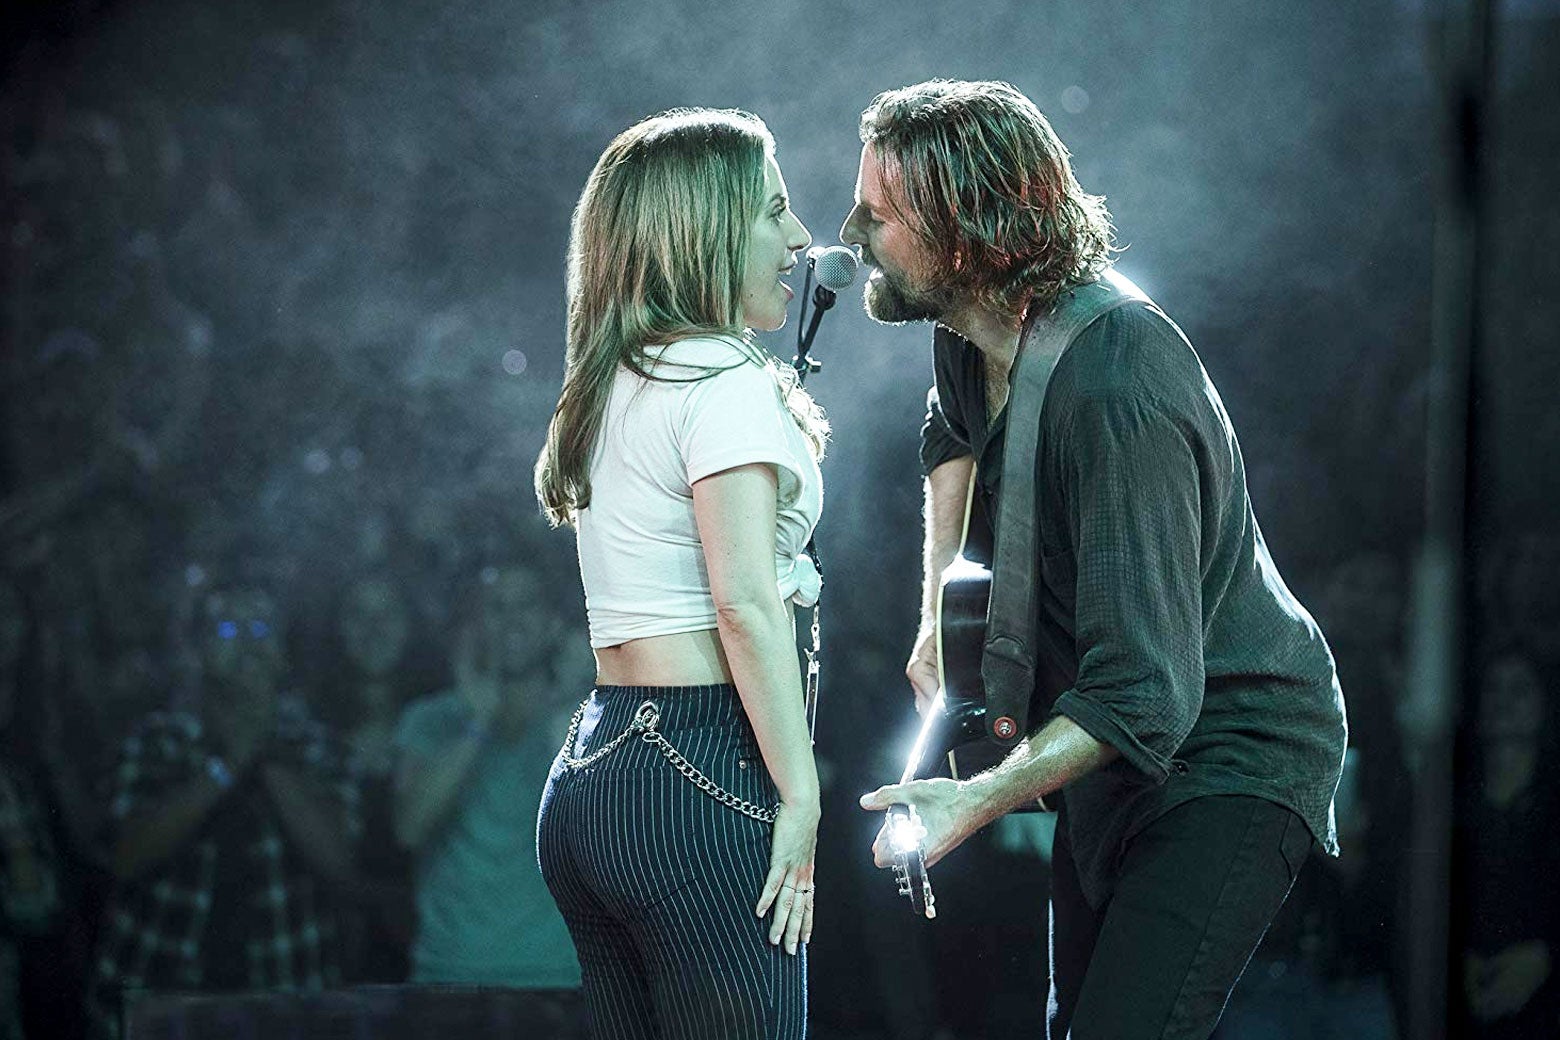 In a scene from A Star Is Born, Lady Gaga and Bradley Cooper sing into a mic onstage.